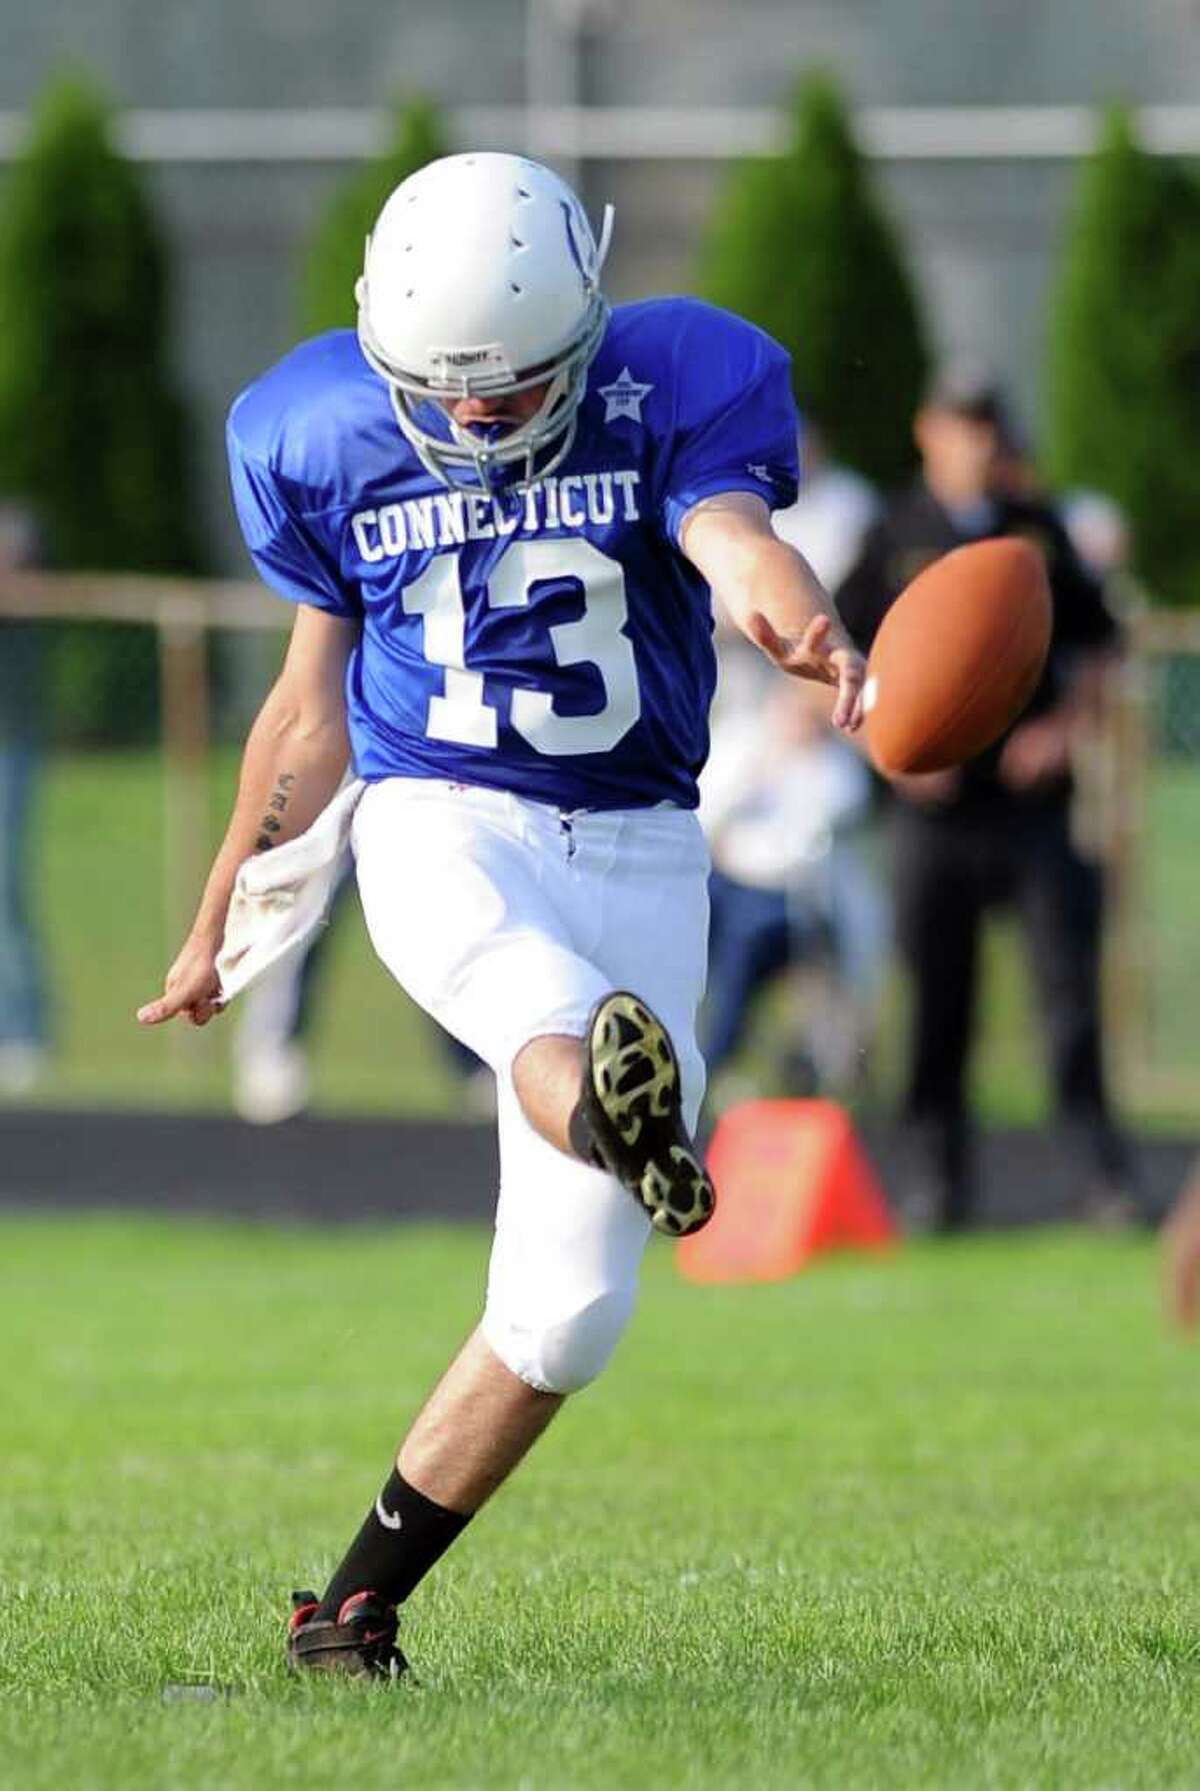 The Connecticut High School football all-star game against Rhode Island on June 25, 2011, at Southington High School.